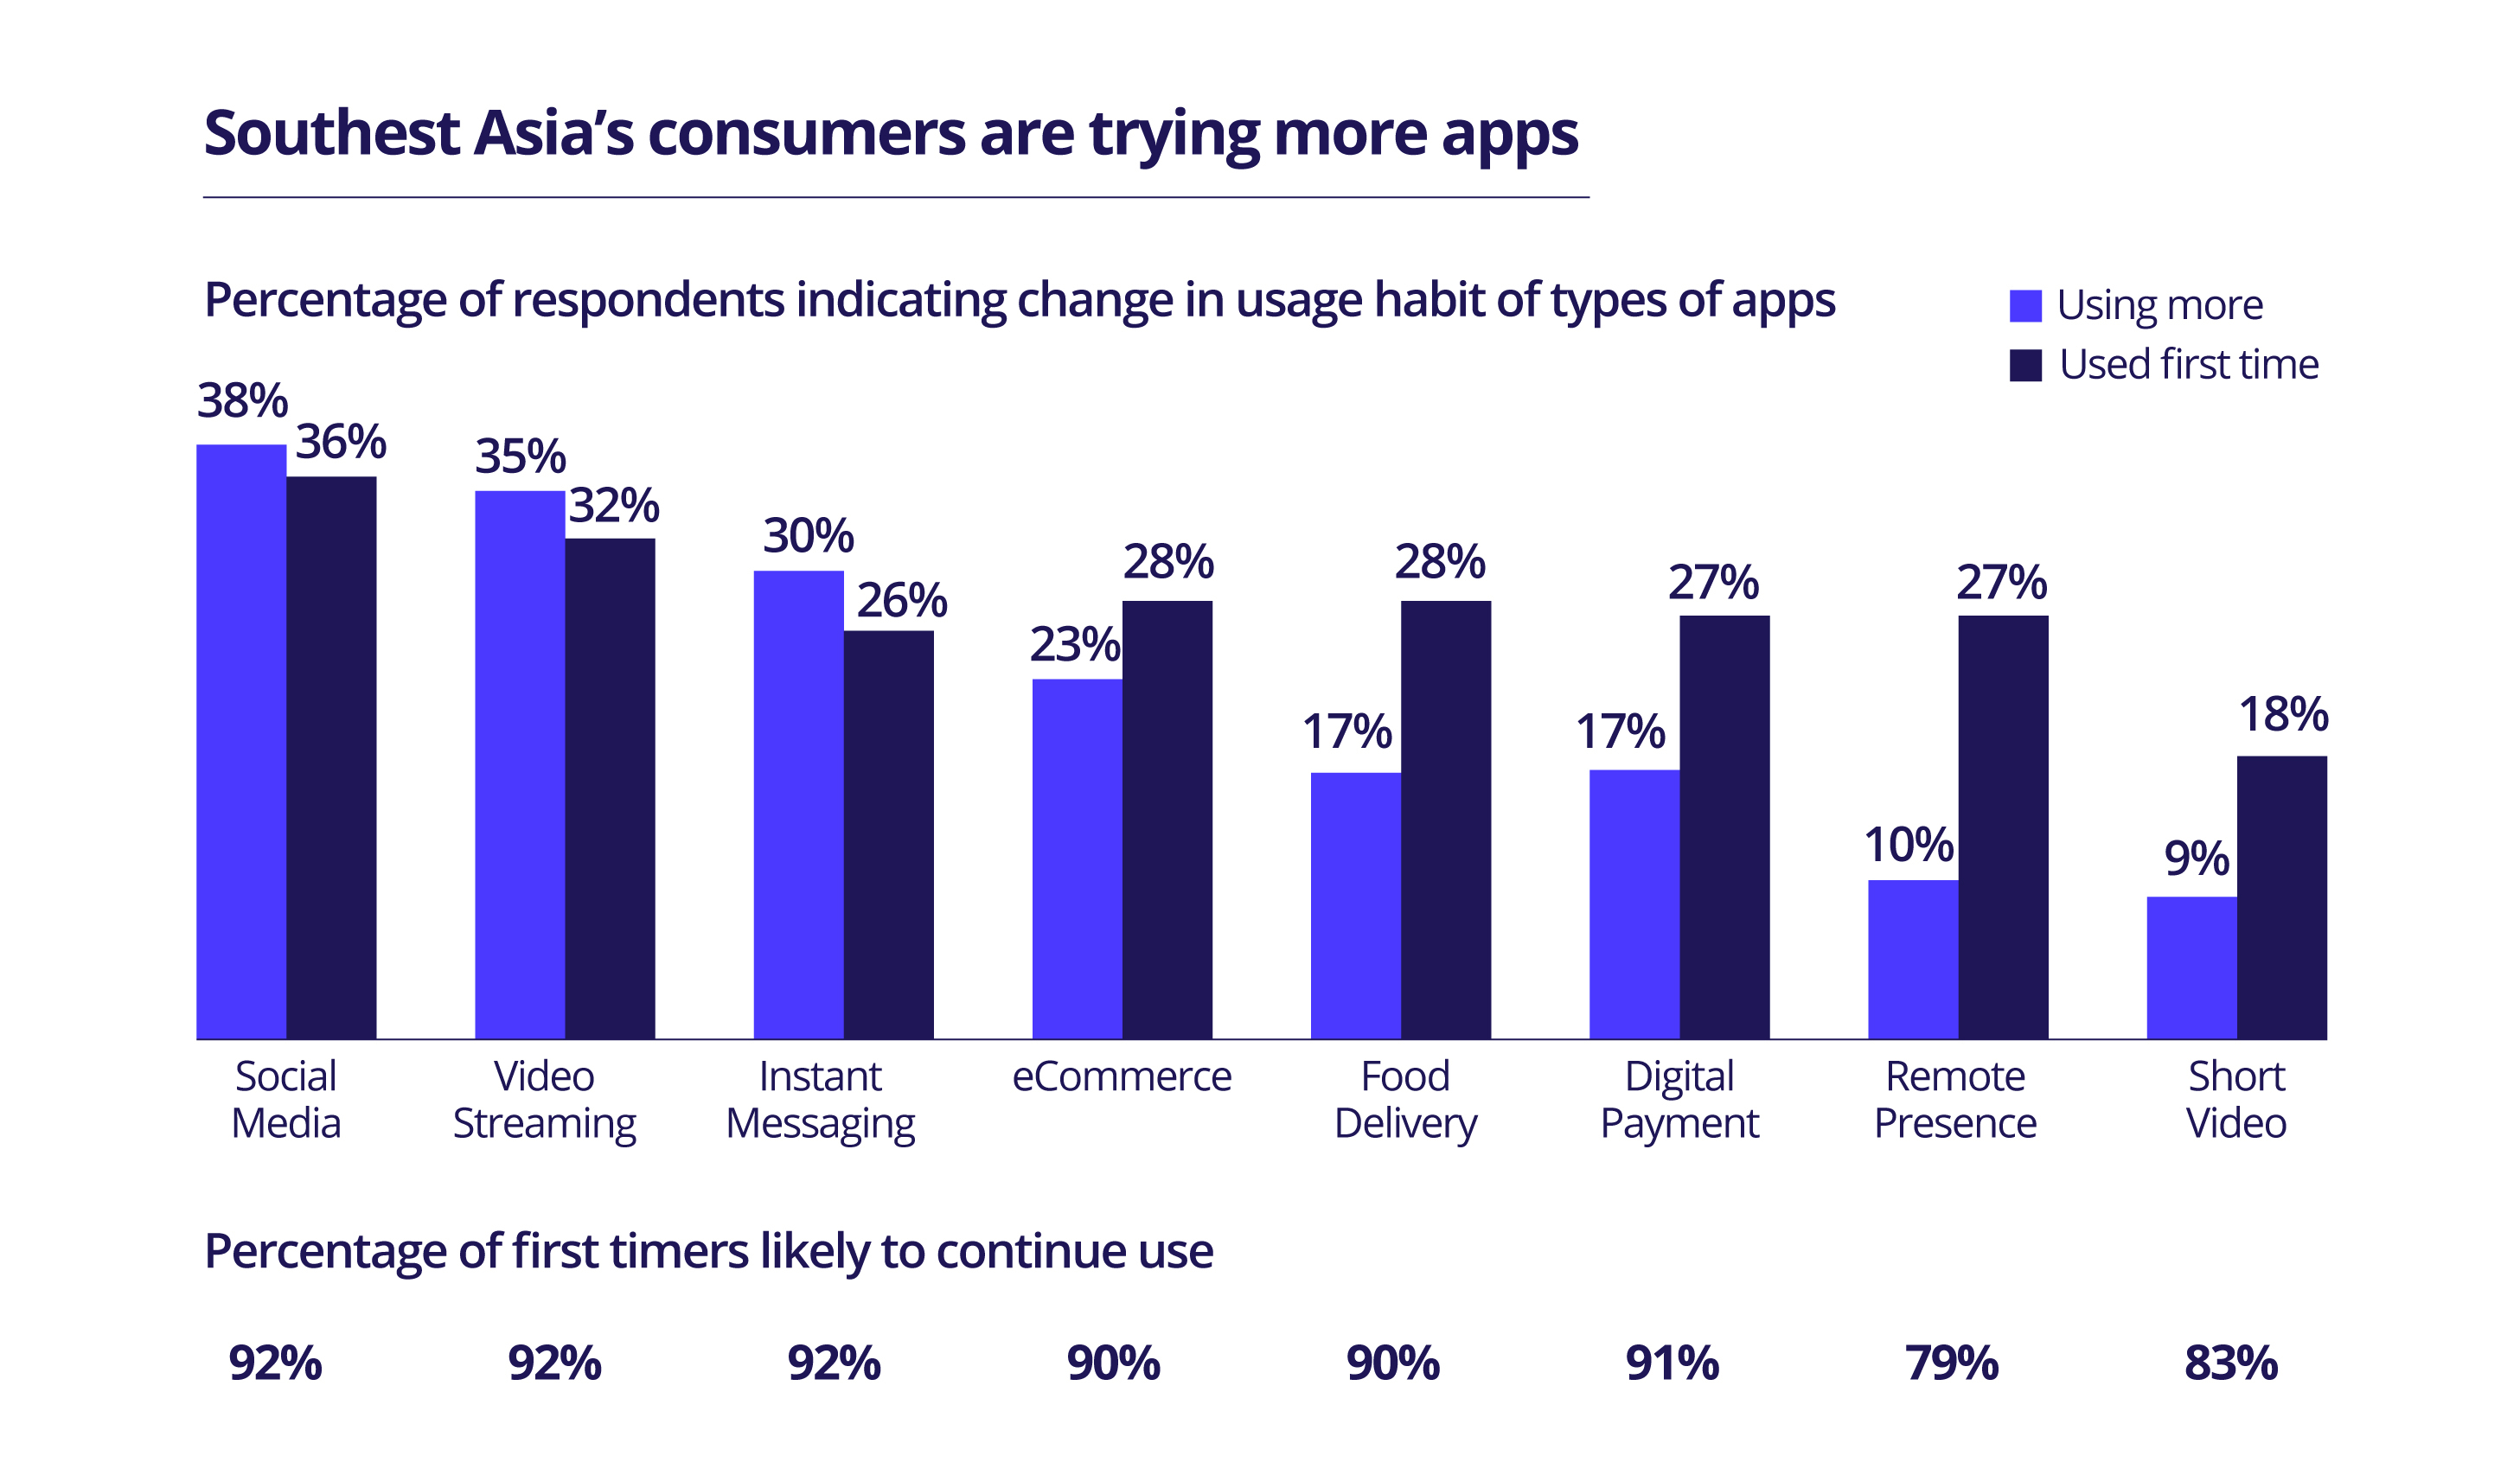 Percentage of new app users